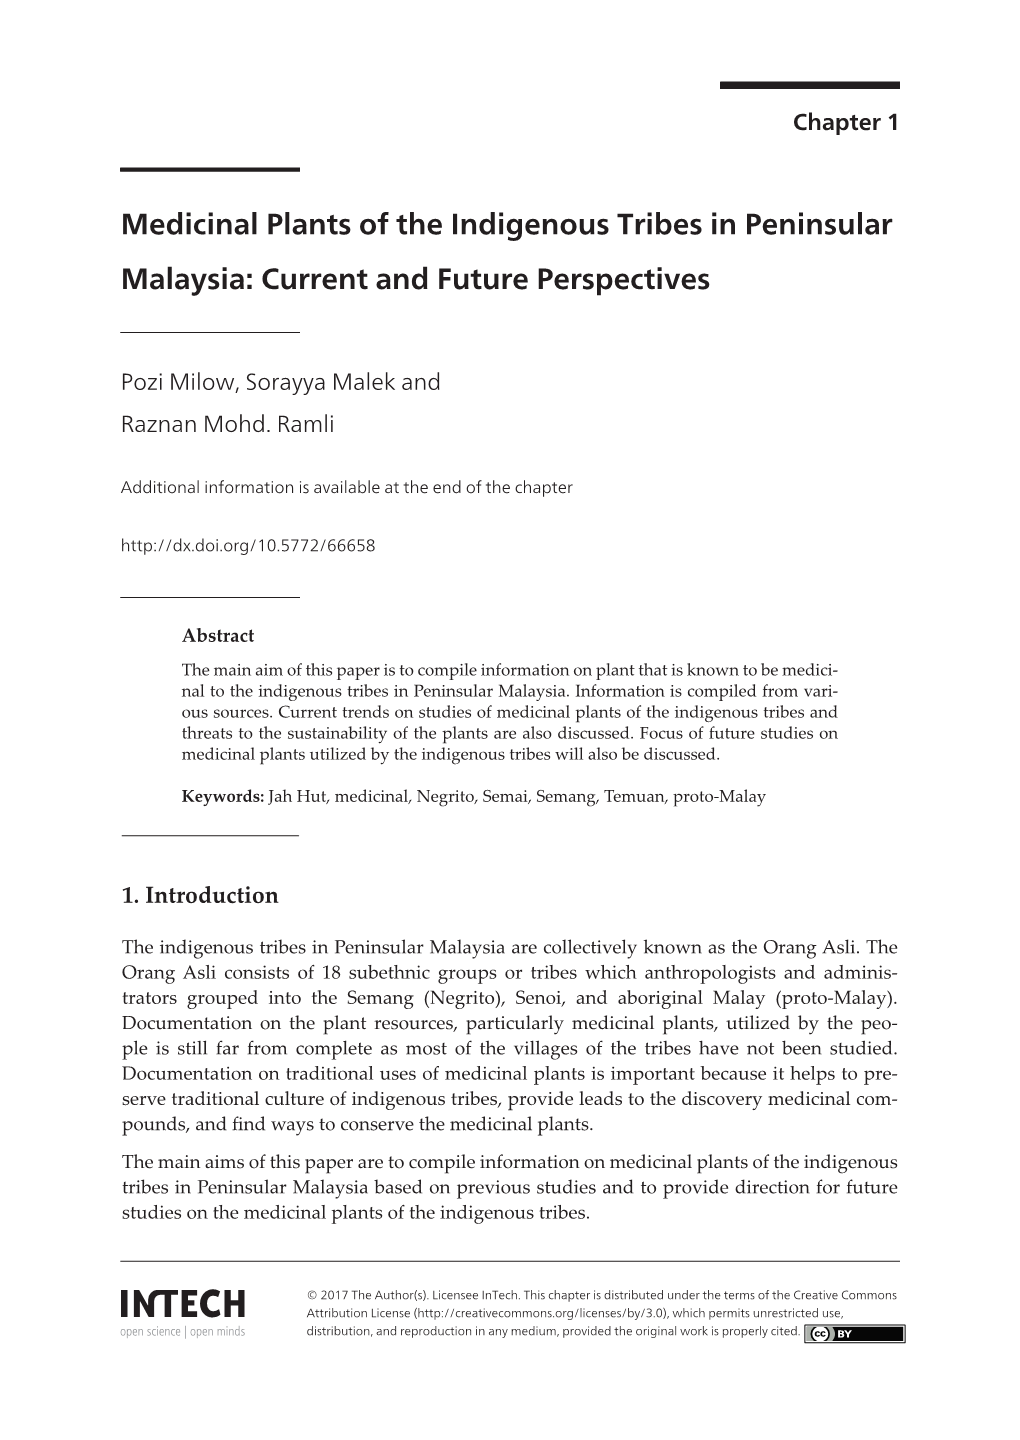 Medicinal Plants of the Indigenous Tribes in Peninsular Malaysia